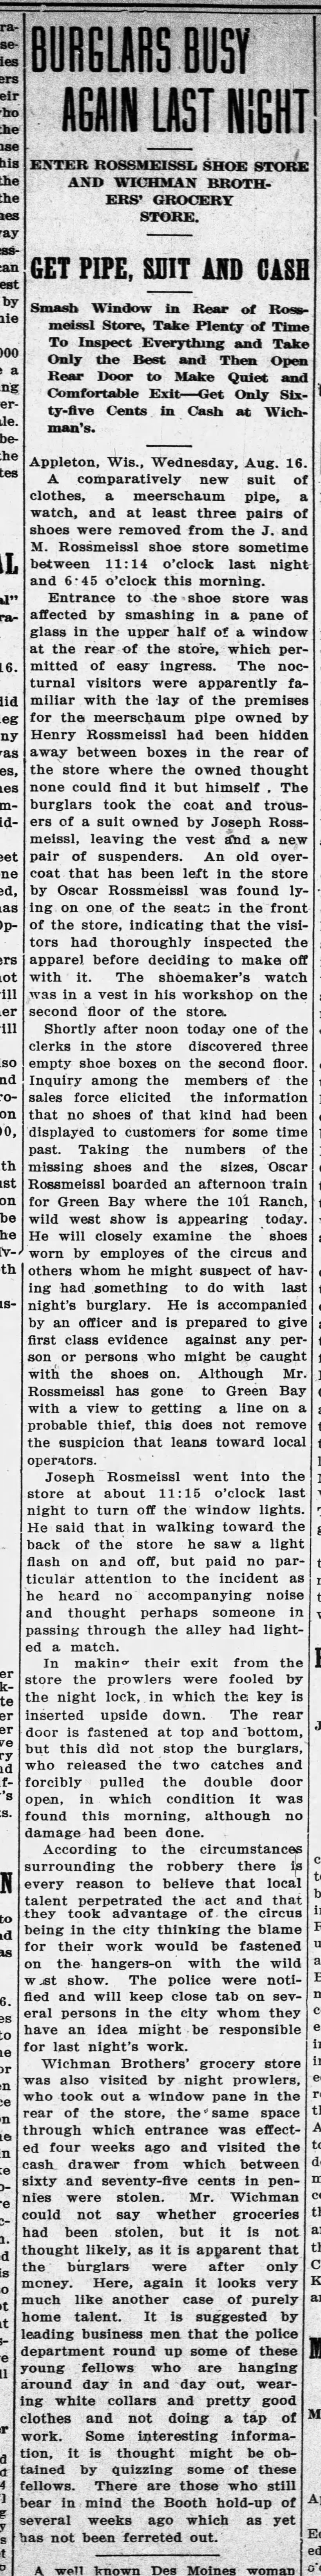 Rossmeissl Shoe Store Robbery 1911